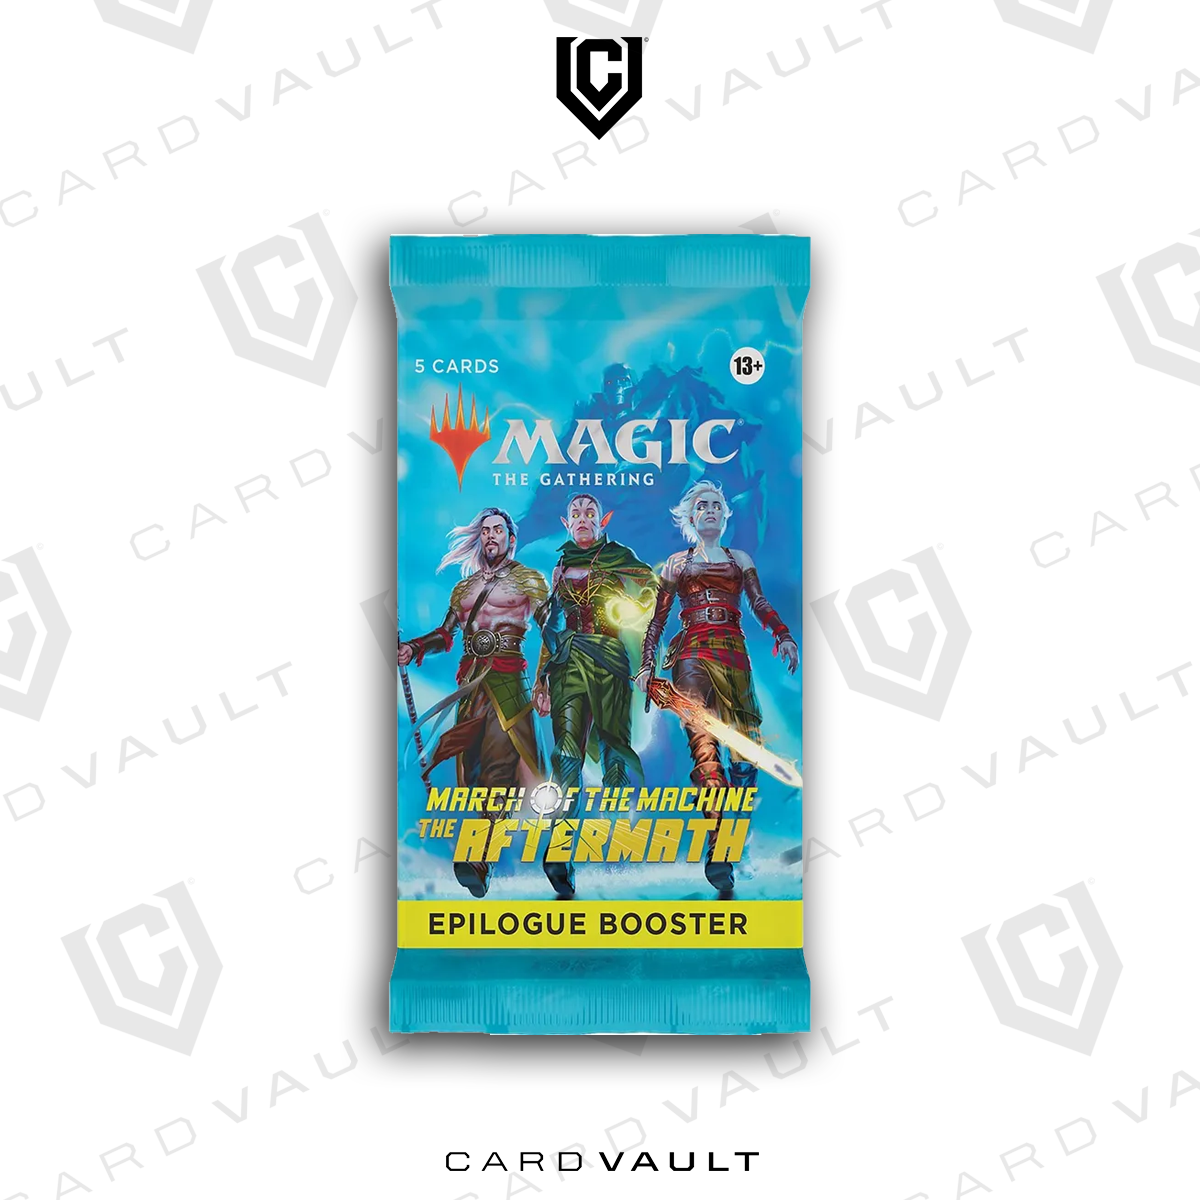 Magic: The Gathering - Aftermath Epilogue Booster